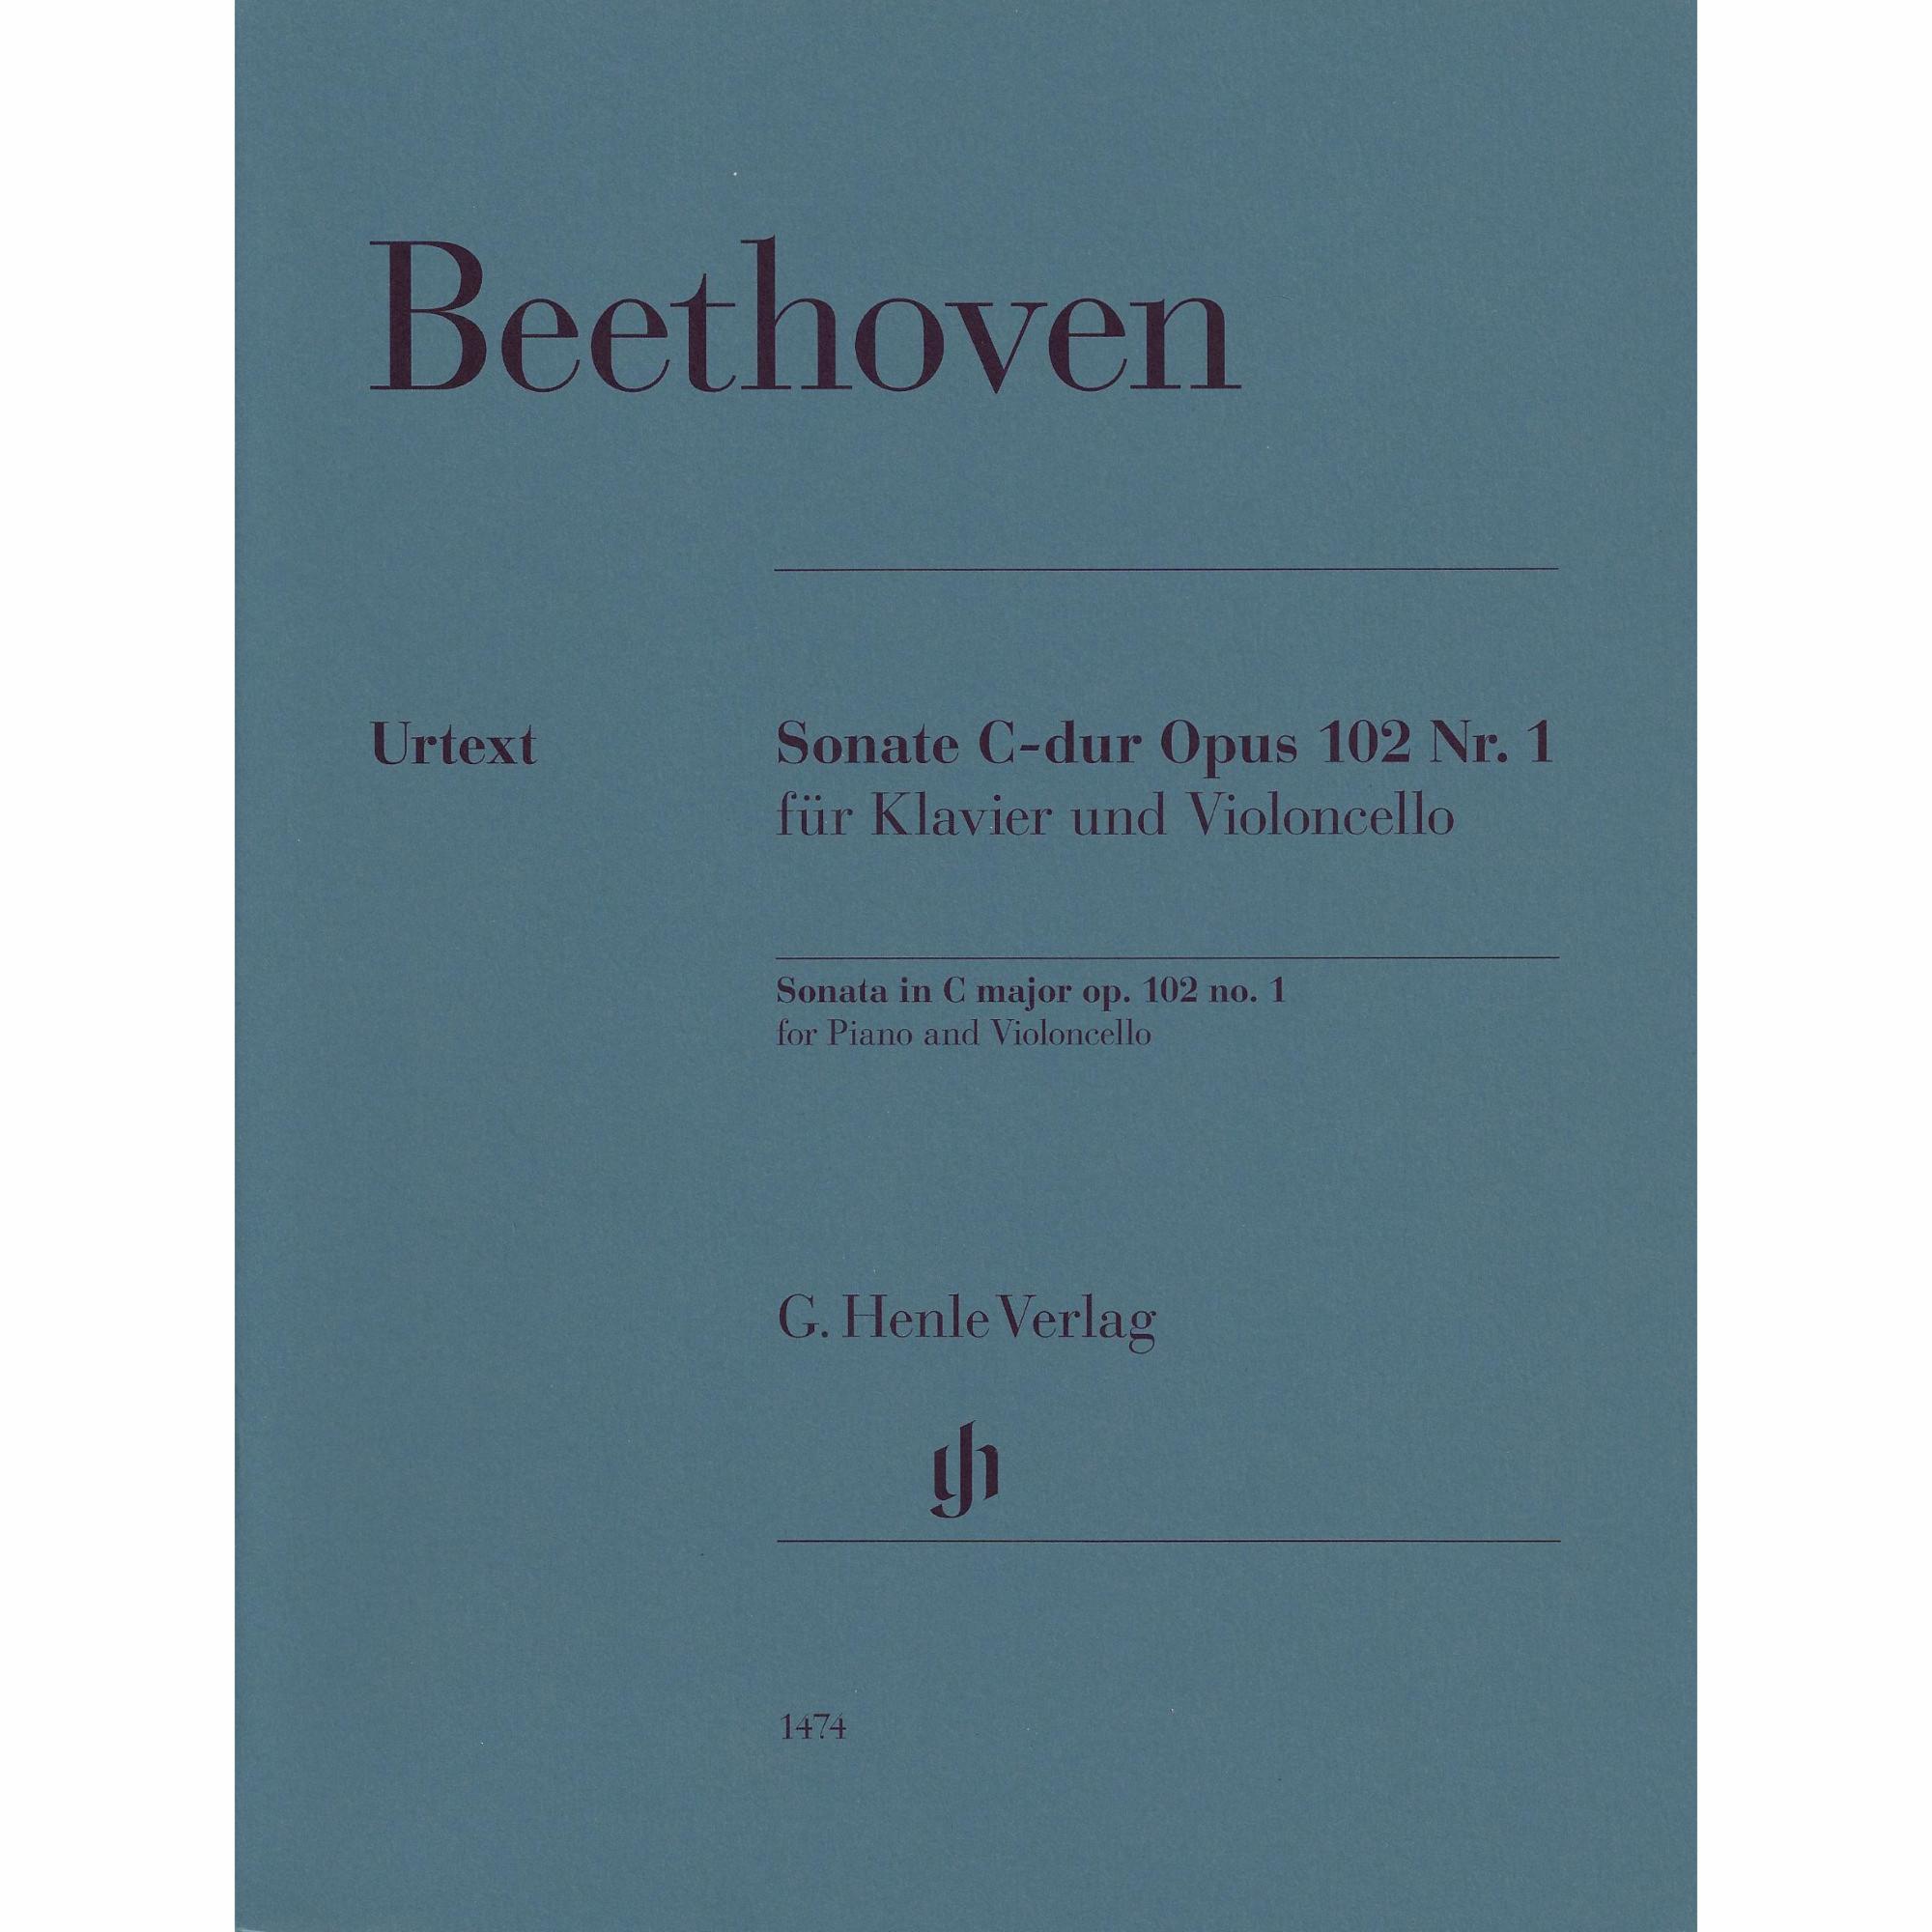 Beethoven -- Sonata in C Major, Op. 102, No. 1 for Cello and Piano